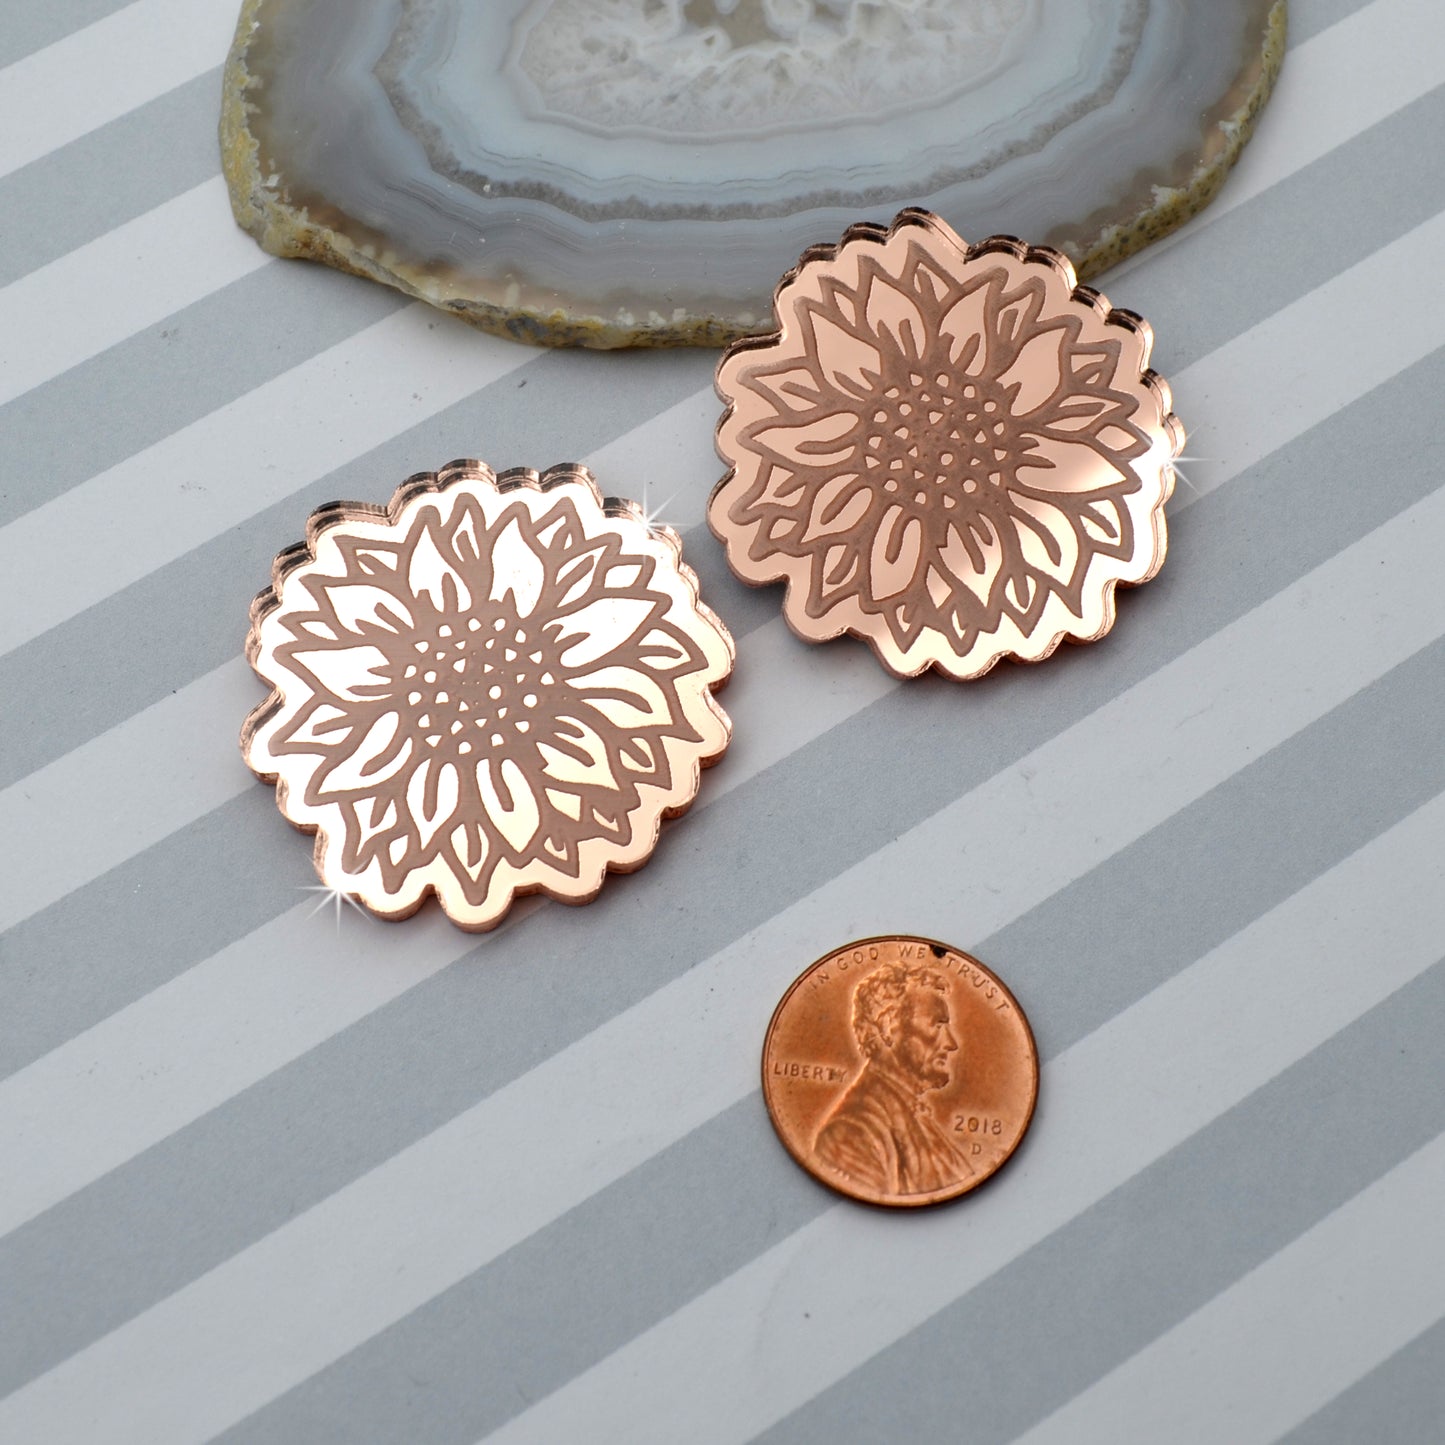 SUNFLOWER CABOCHONS - Rose Gold Mirror Laser Cut Acrylic - Set of 2 Flat Back Cabs